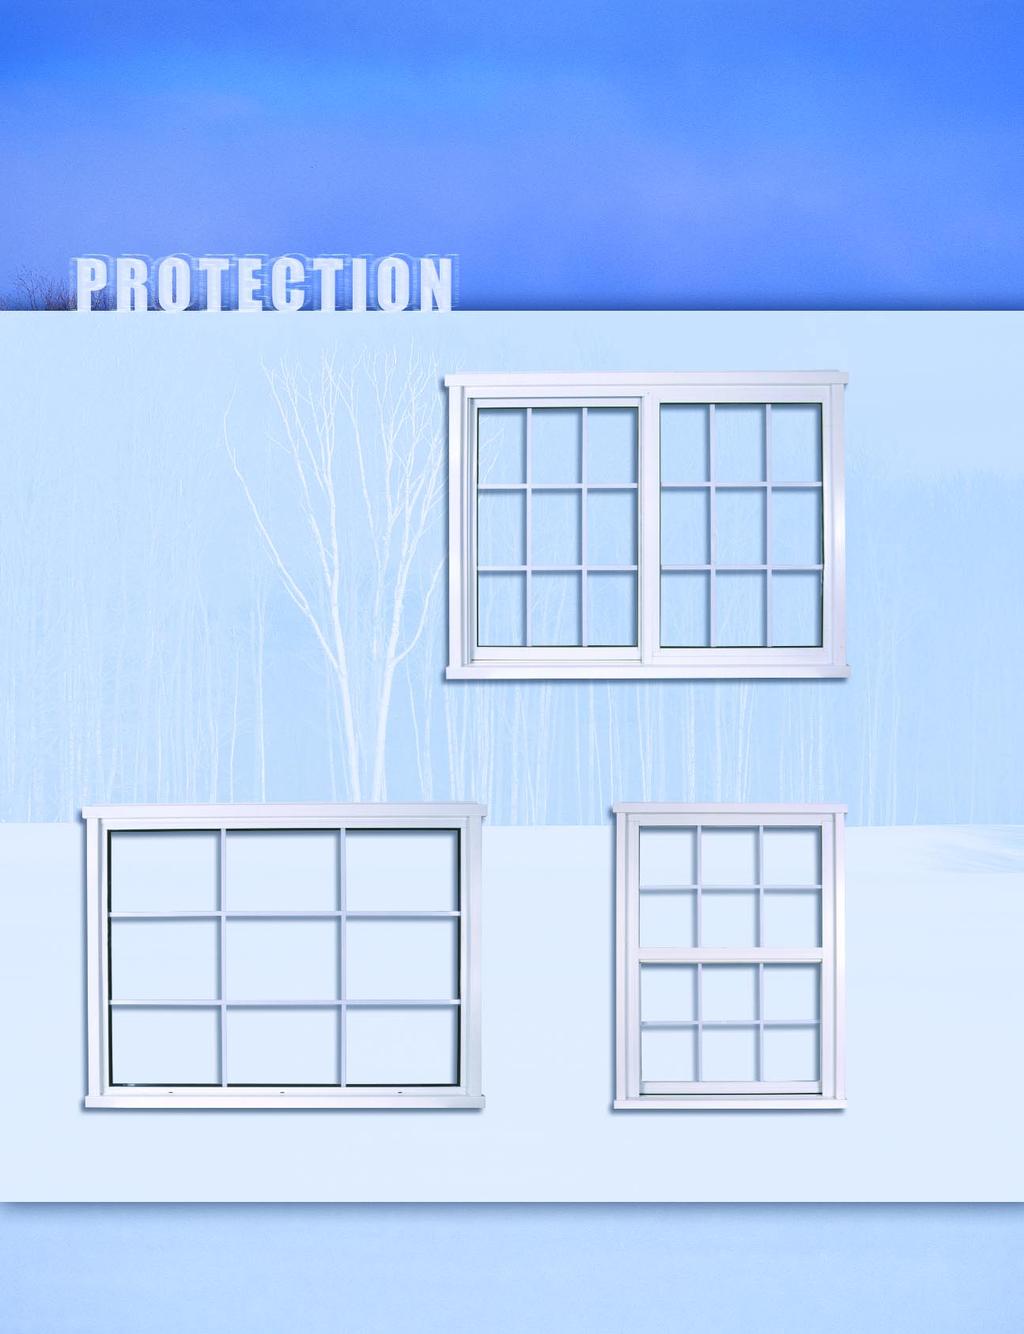 Protecting you from the elements AJ Manufacturing s insulated aluminum windows keep your building protected from all extremes of weather.